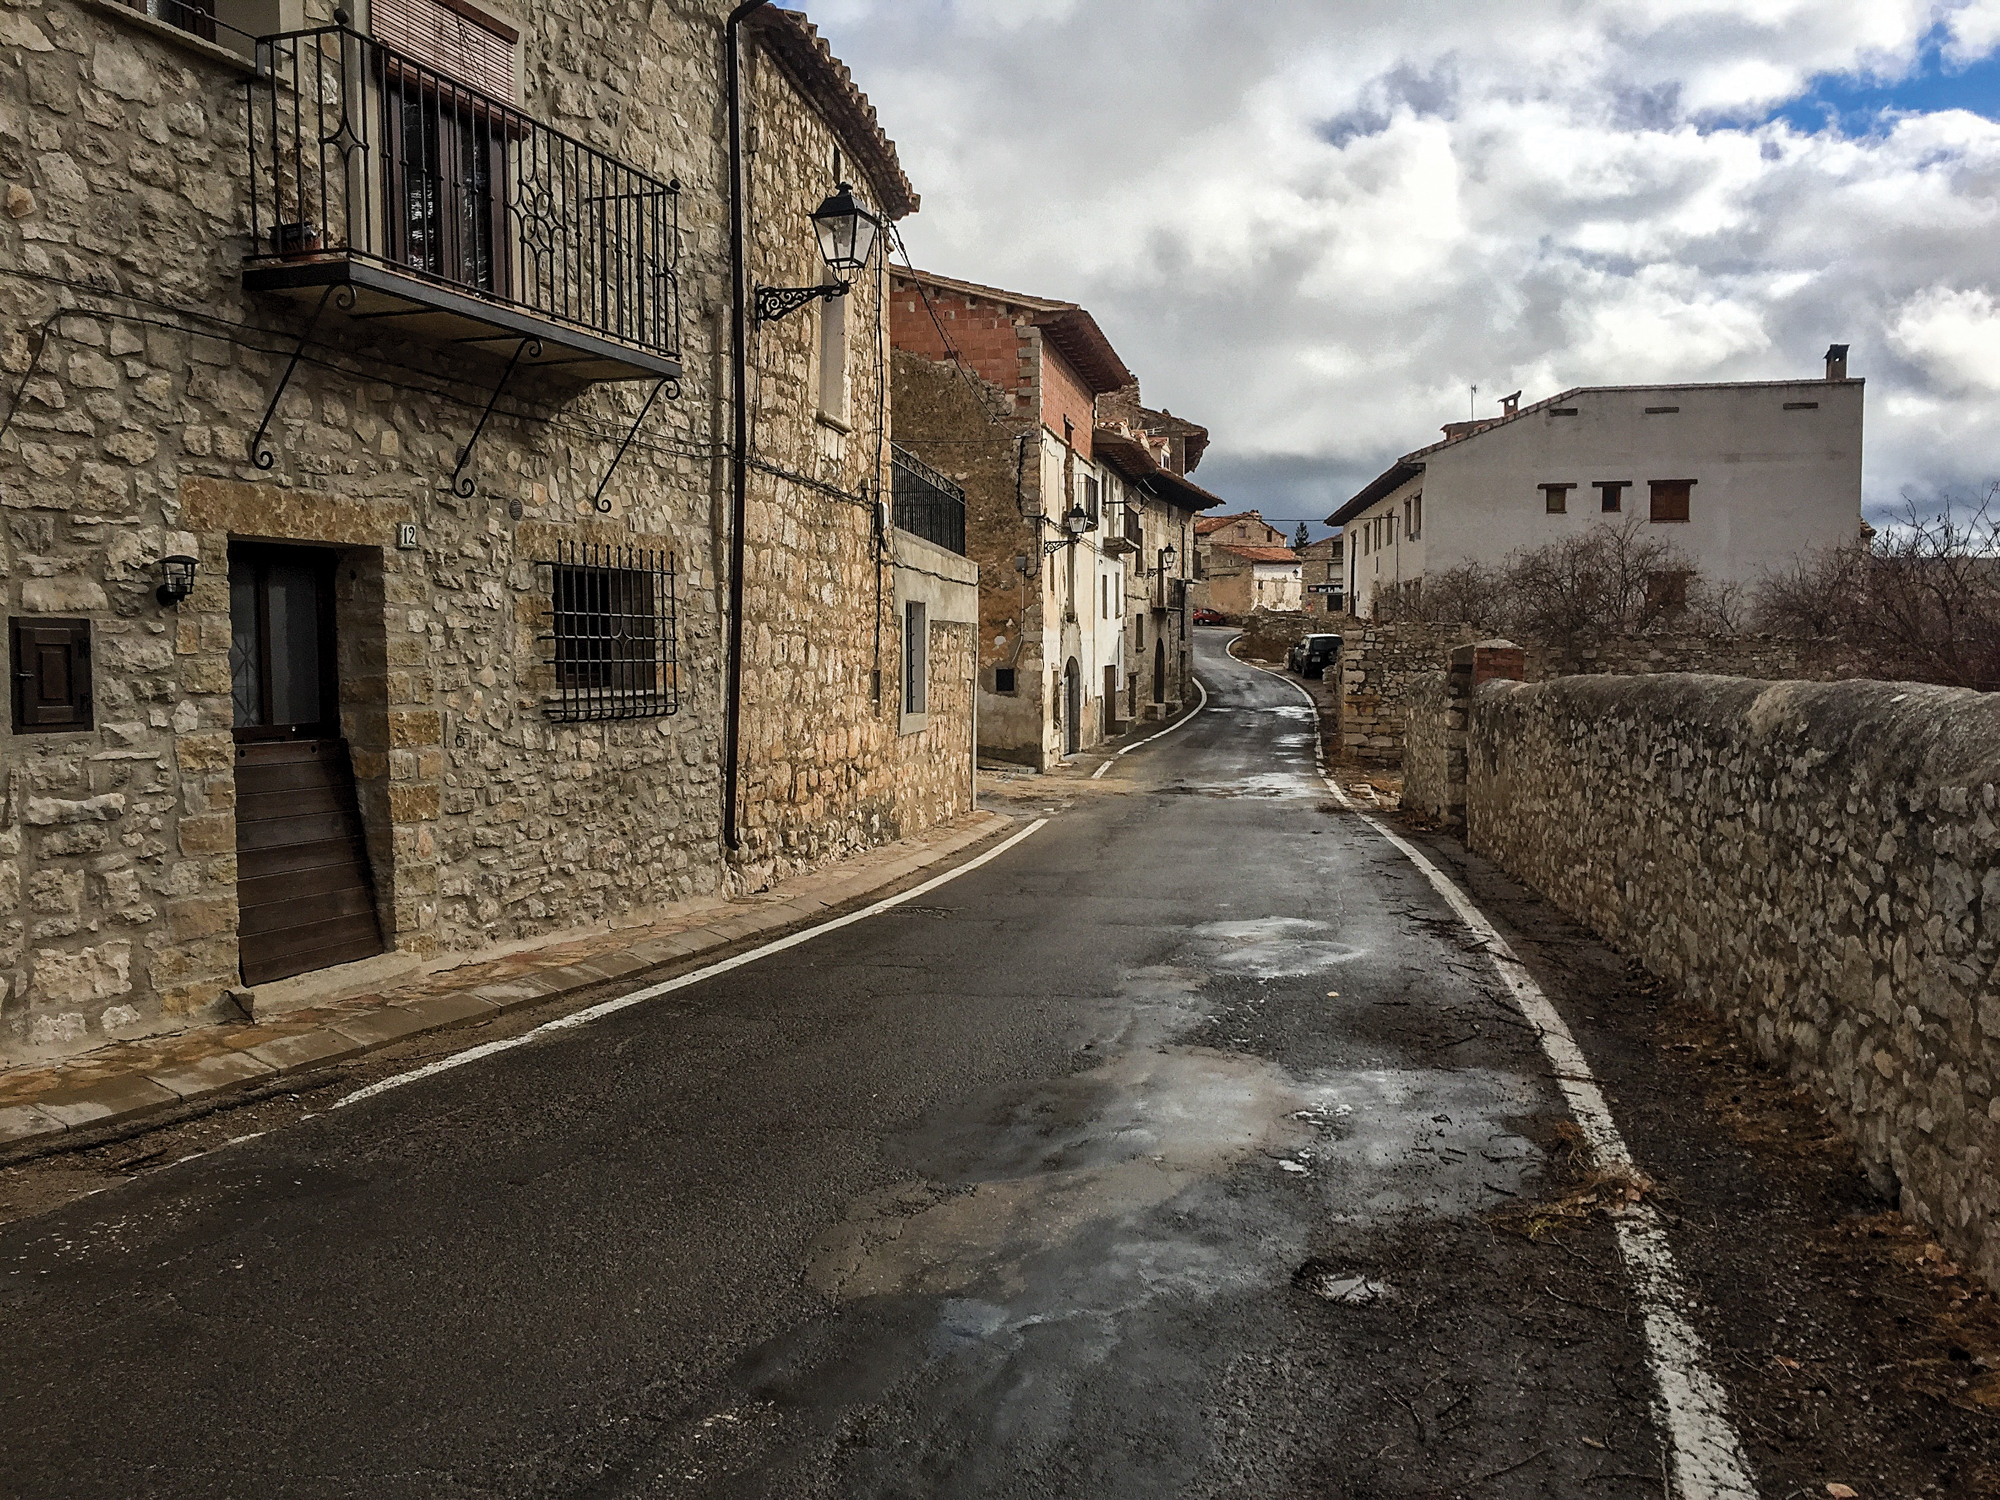 The streets of a medieval Spanish town.